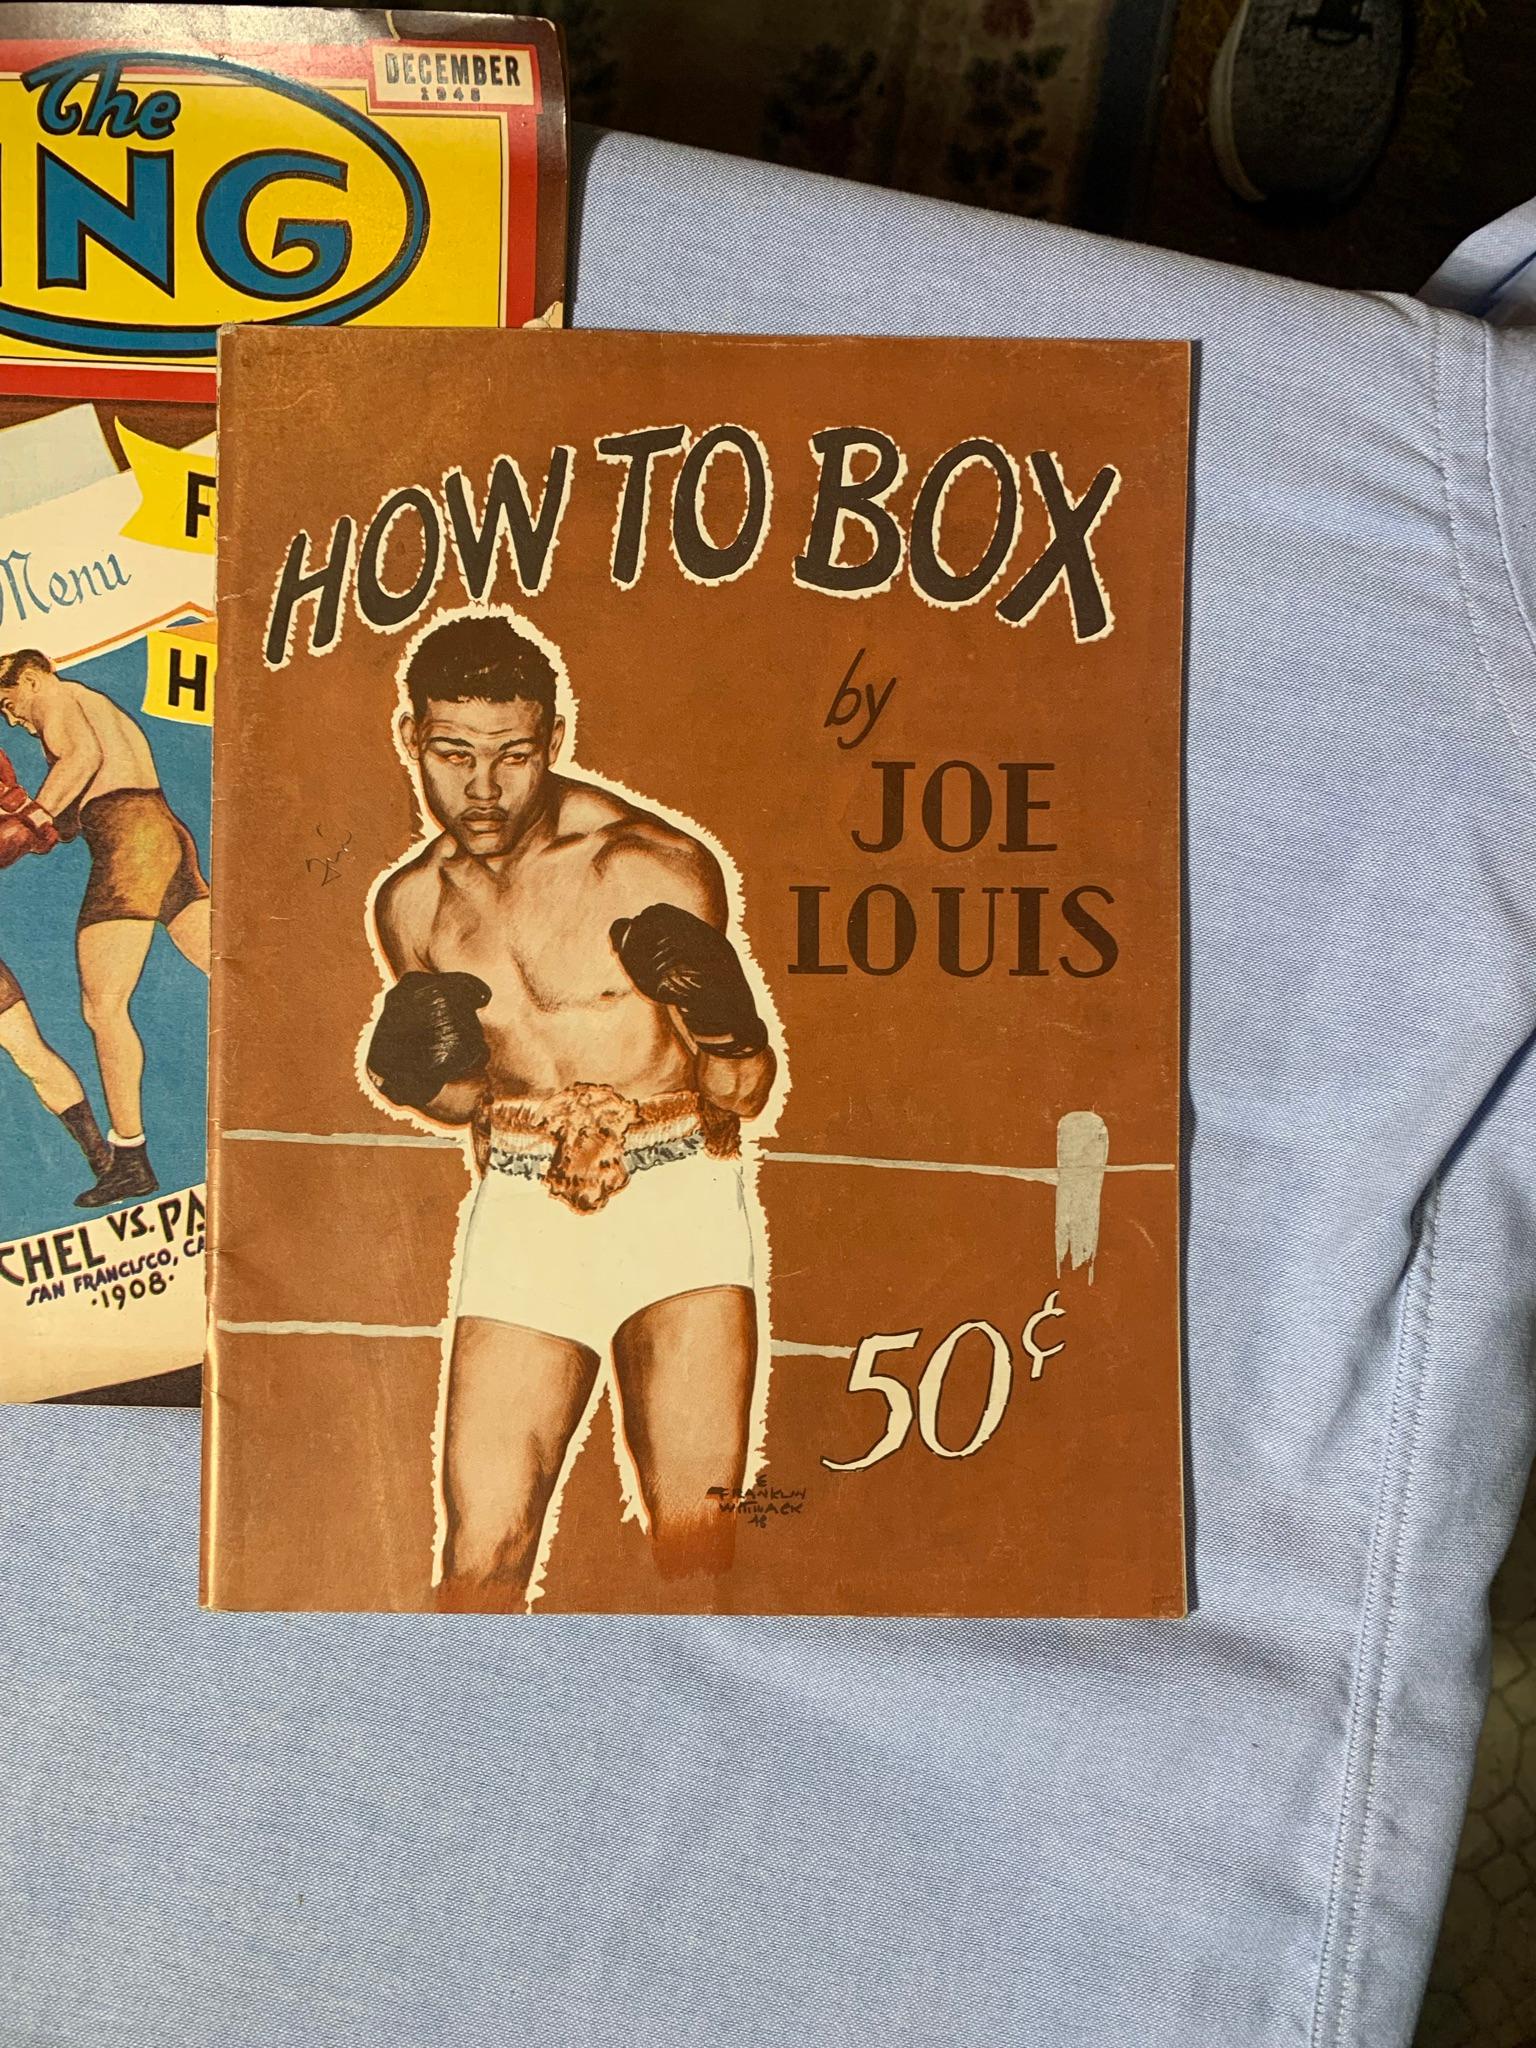 Early Vintage Boxing Magazines "The Ring" & Sport.  How To Box by Joe Louis